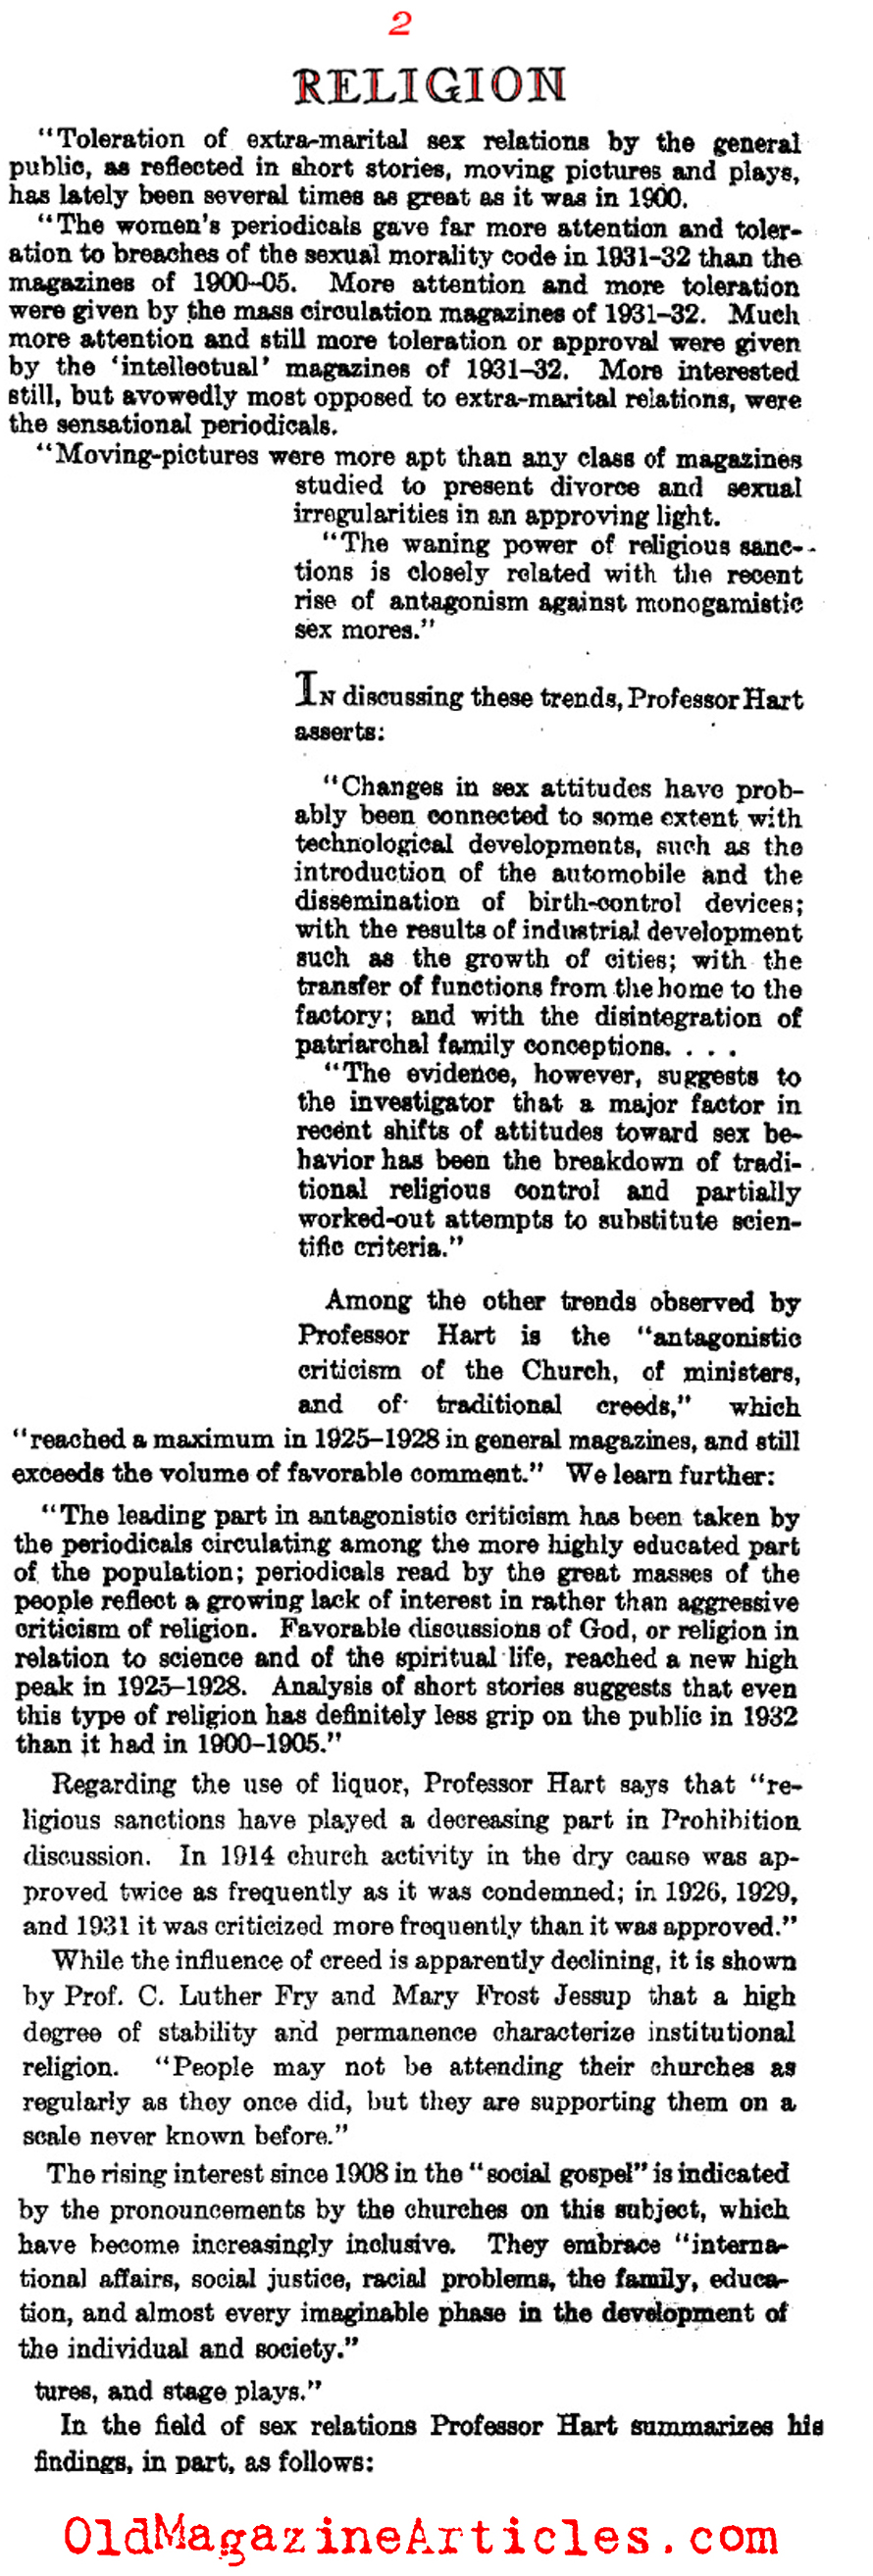 Secular America on the Rise (Literary Digest, 1933)